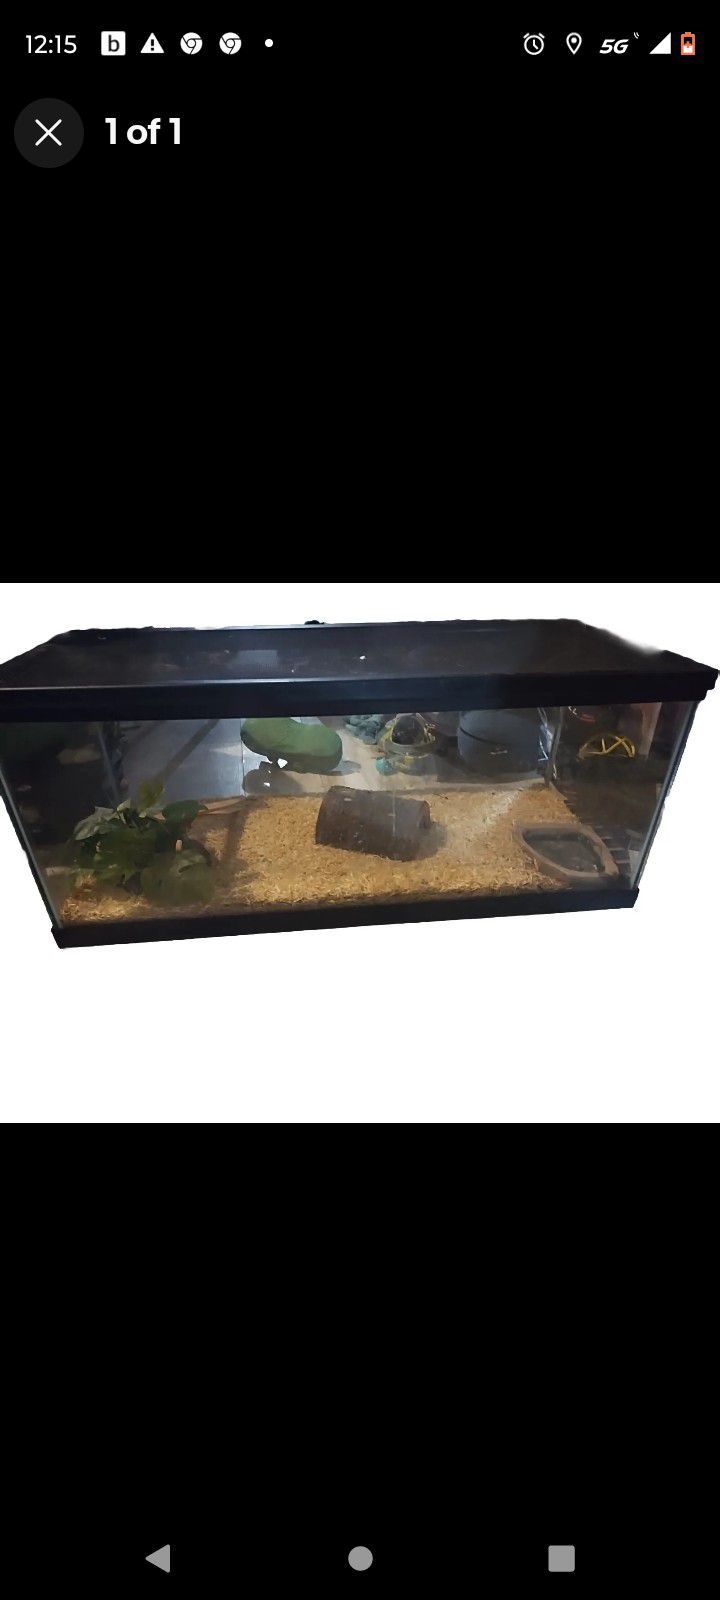 Reptile Tank With Lid And Snake Accessories 